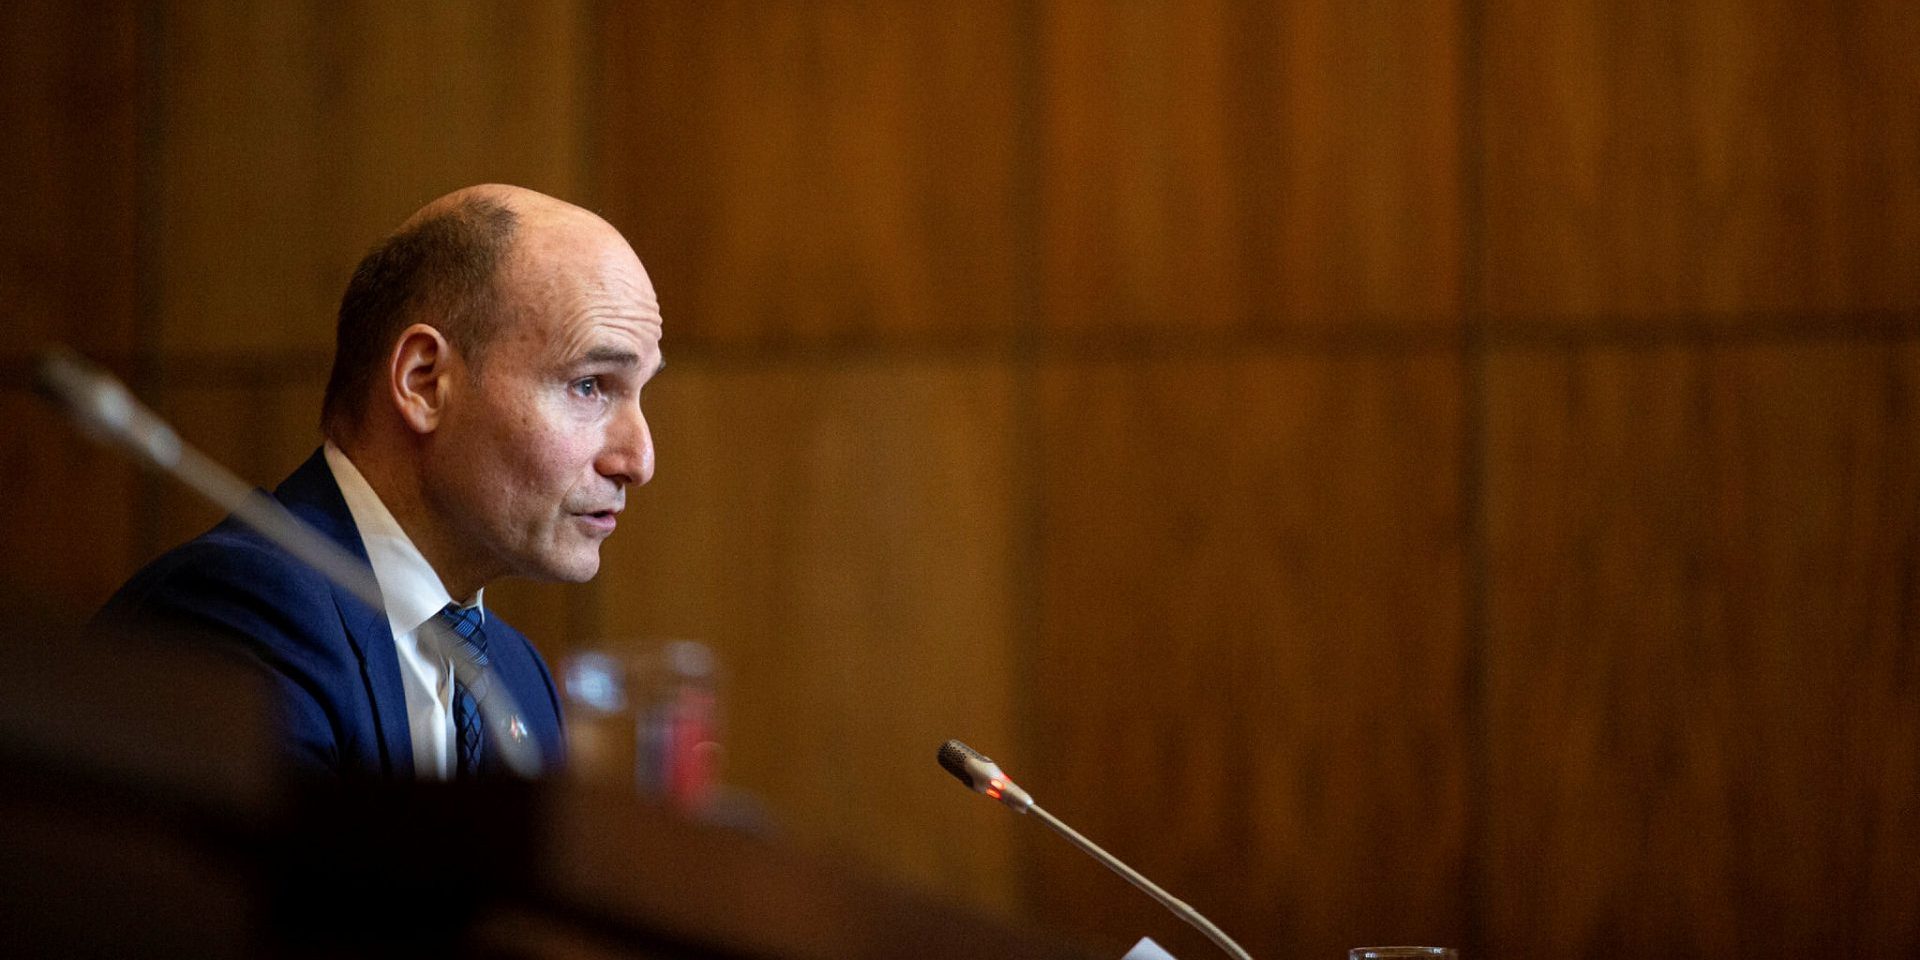 Minister of Health Jean-Yves Duclos speaks with reporters at a media availability at the Sir John A. Macdonald building in Ottawa on Jan. 20, 2023, to update Canadians on the COVID-19 pandemic. Andrew Meade